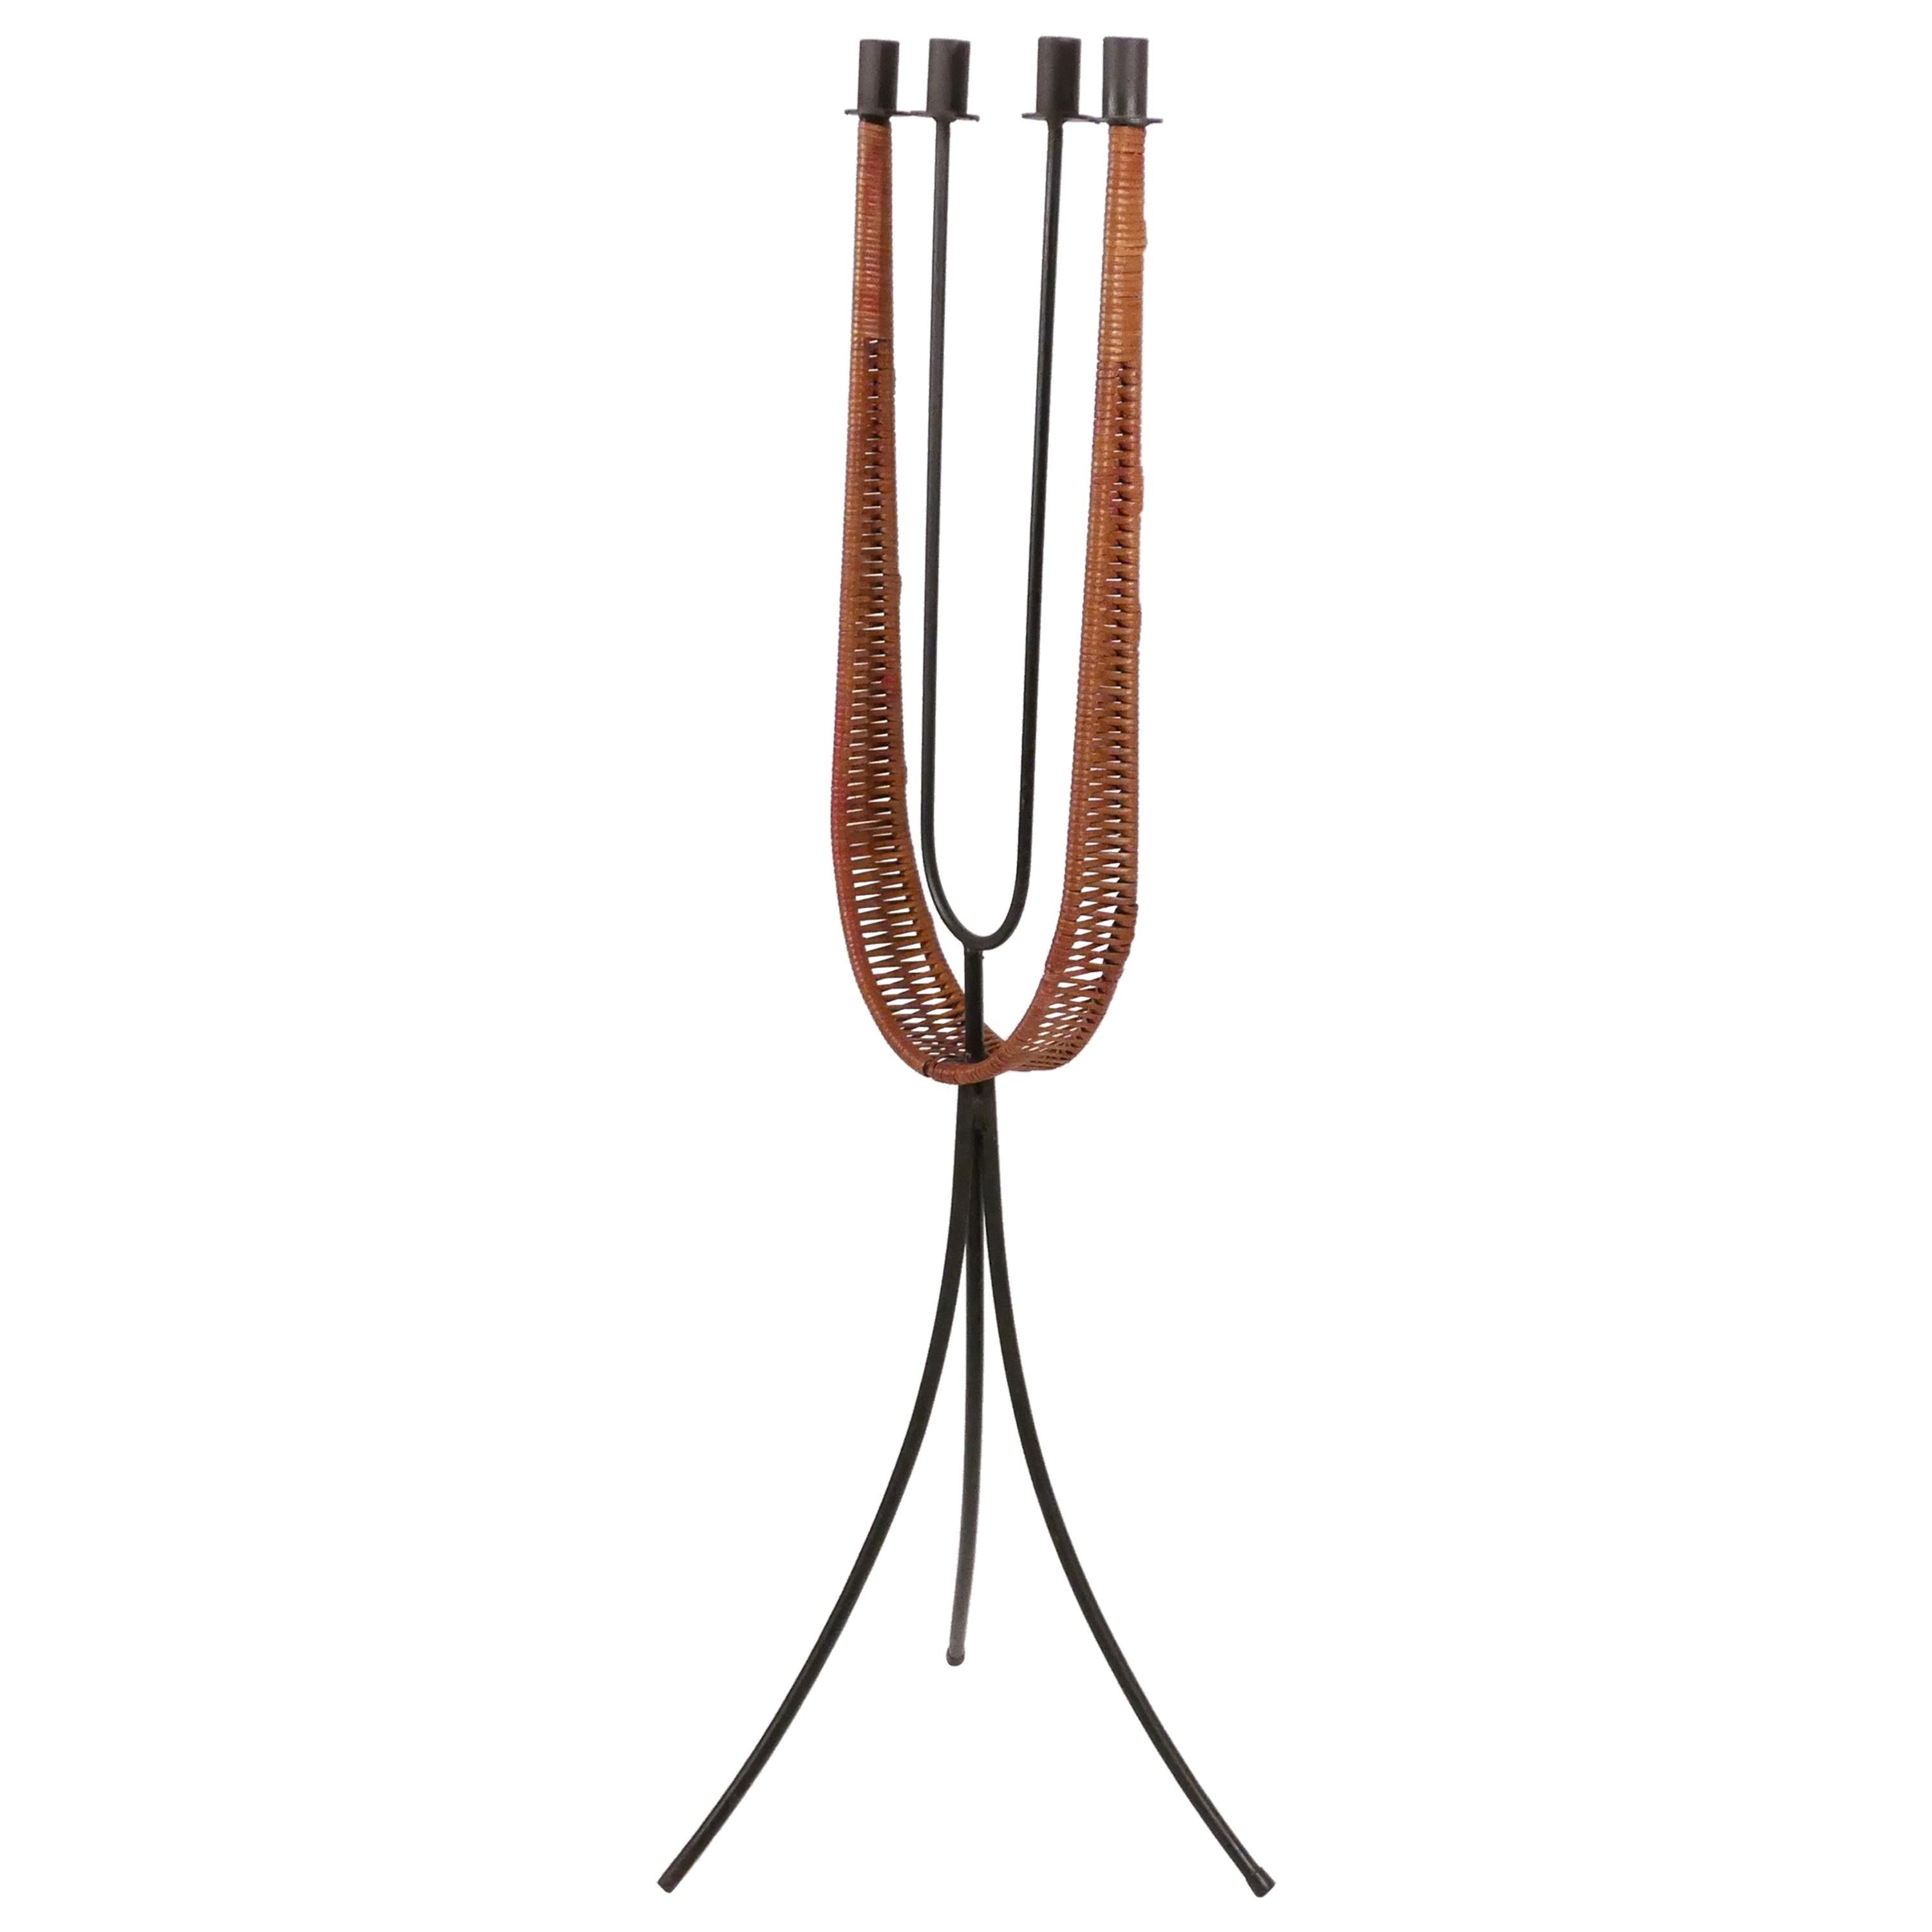 Wrought Iron and Cane Mid-Century Modern Candelabra Torchère by Arthur Umanoff